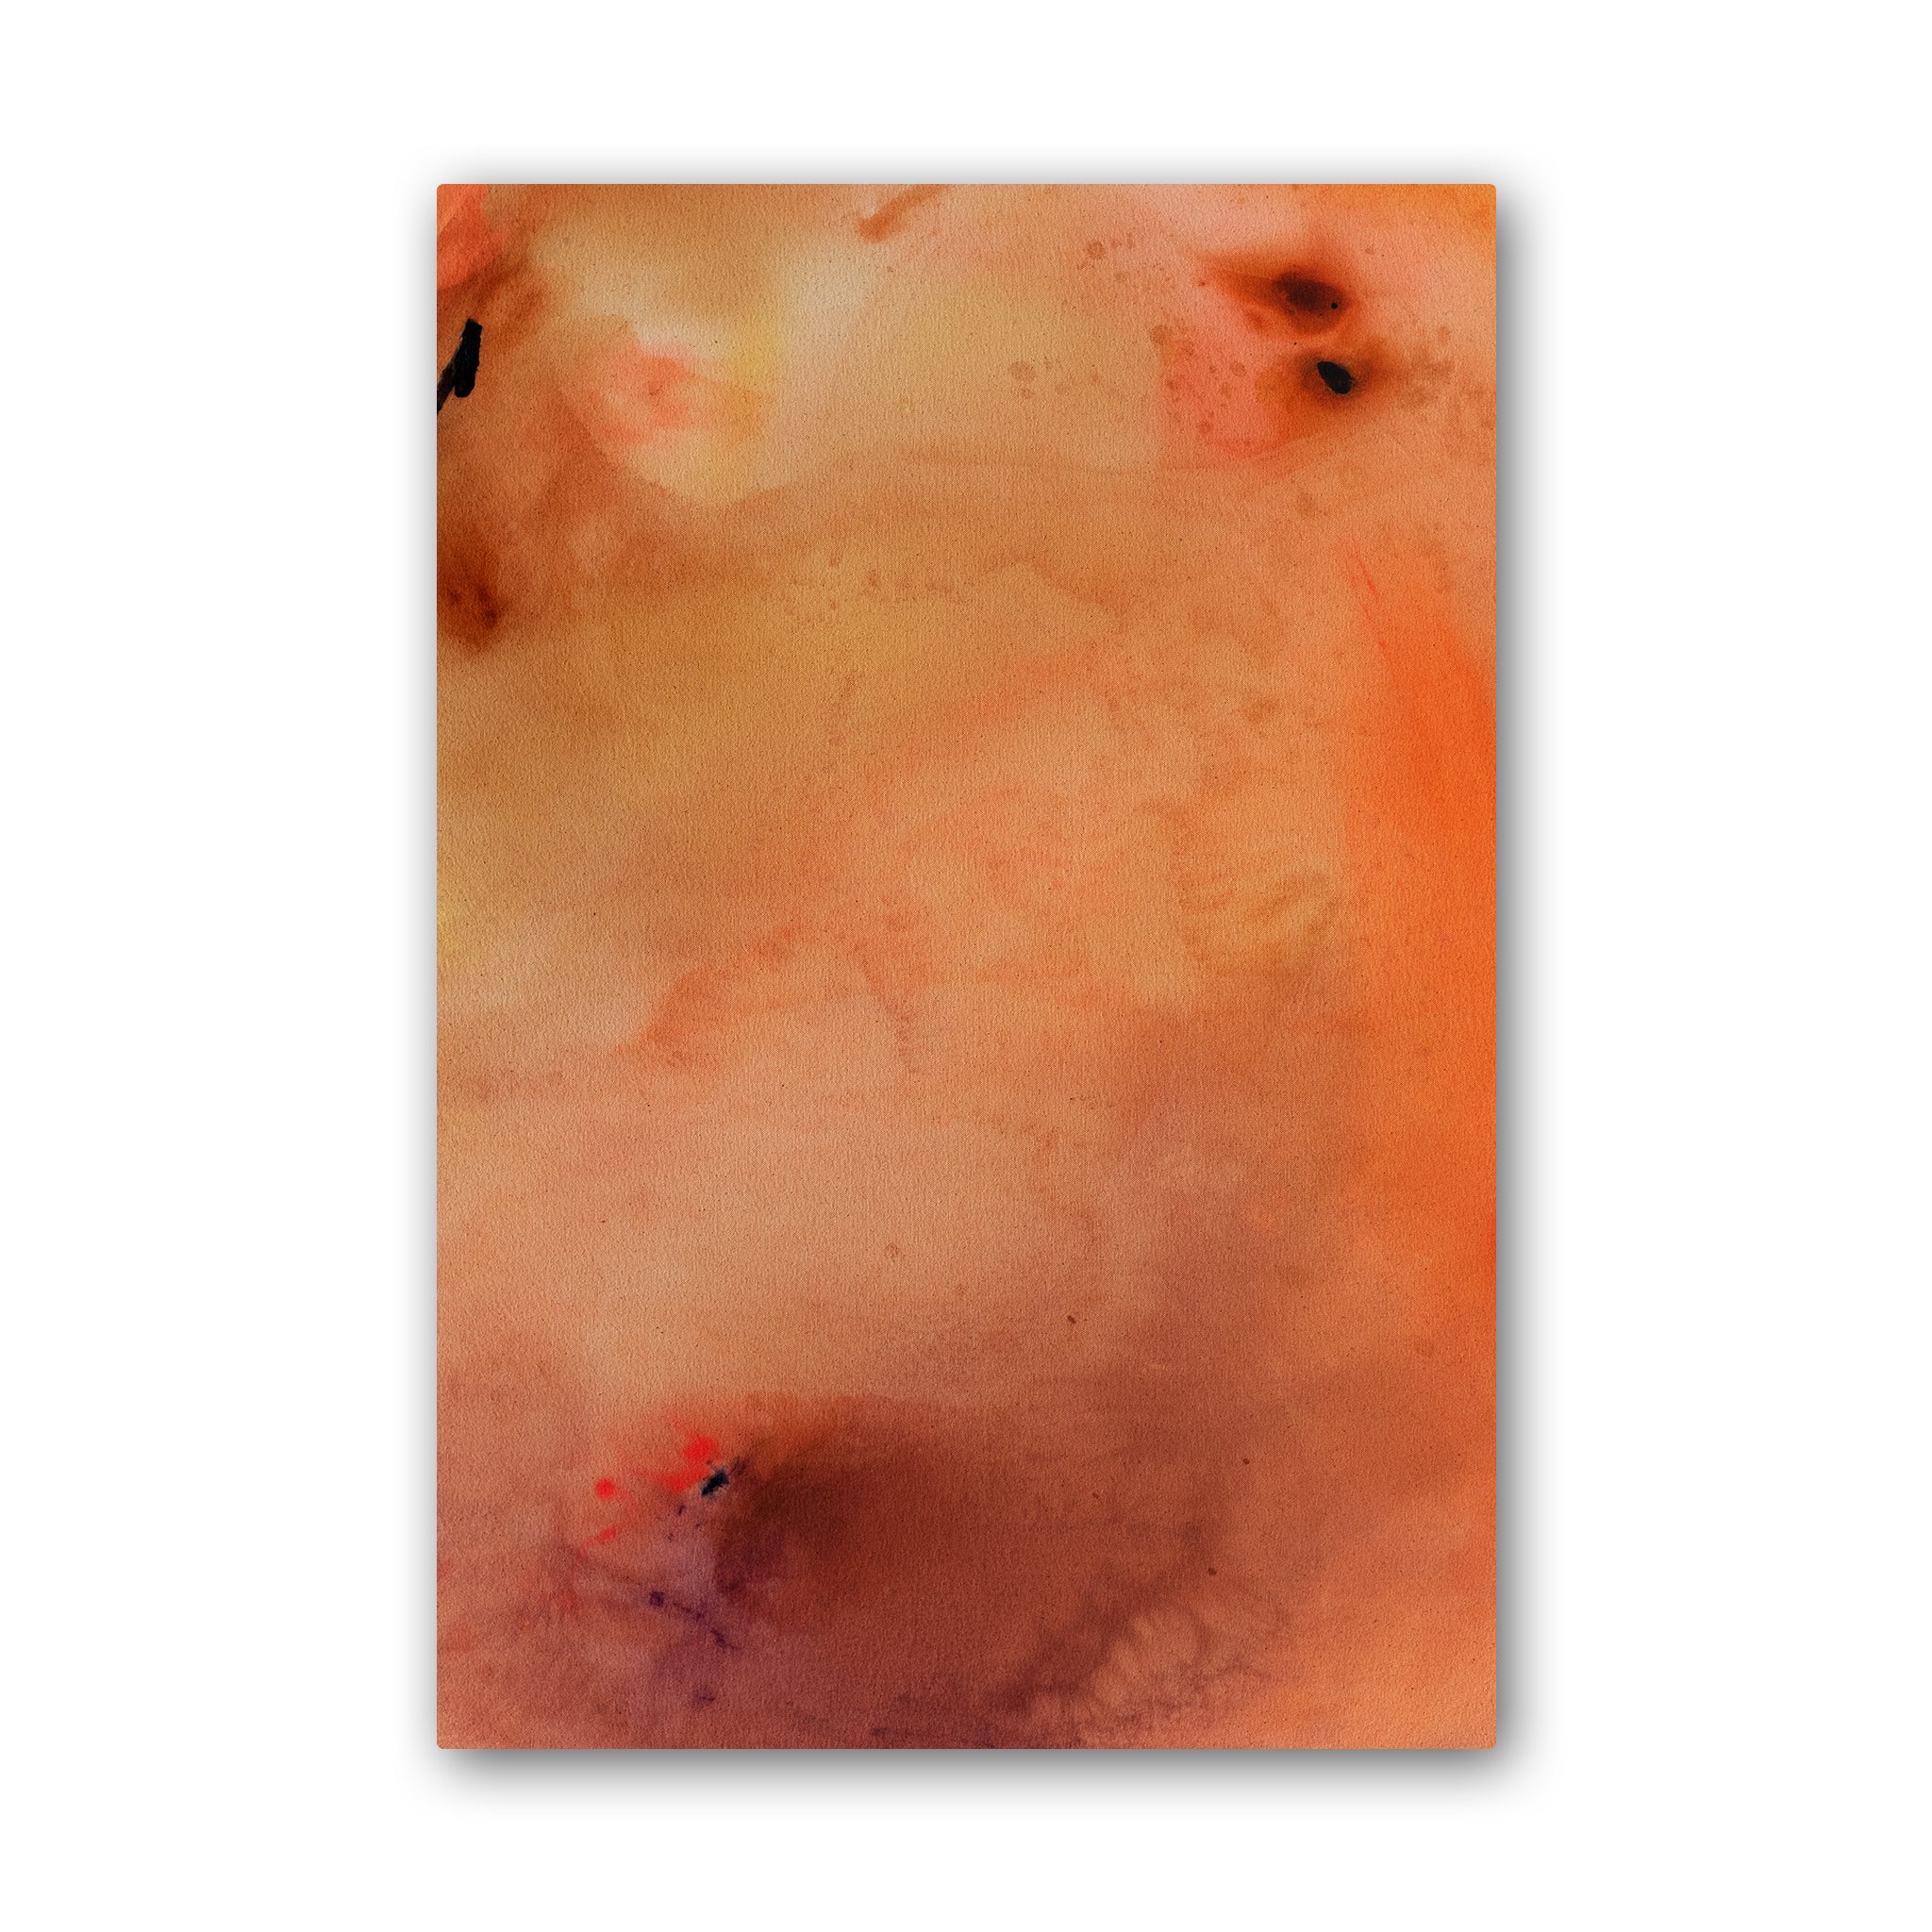 An abstract painting made with washes of acrylic orange paint.